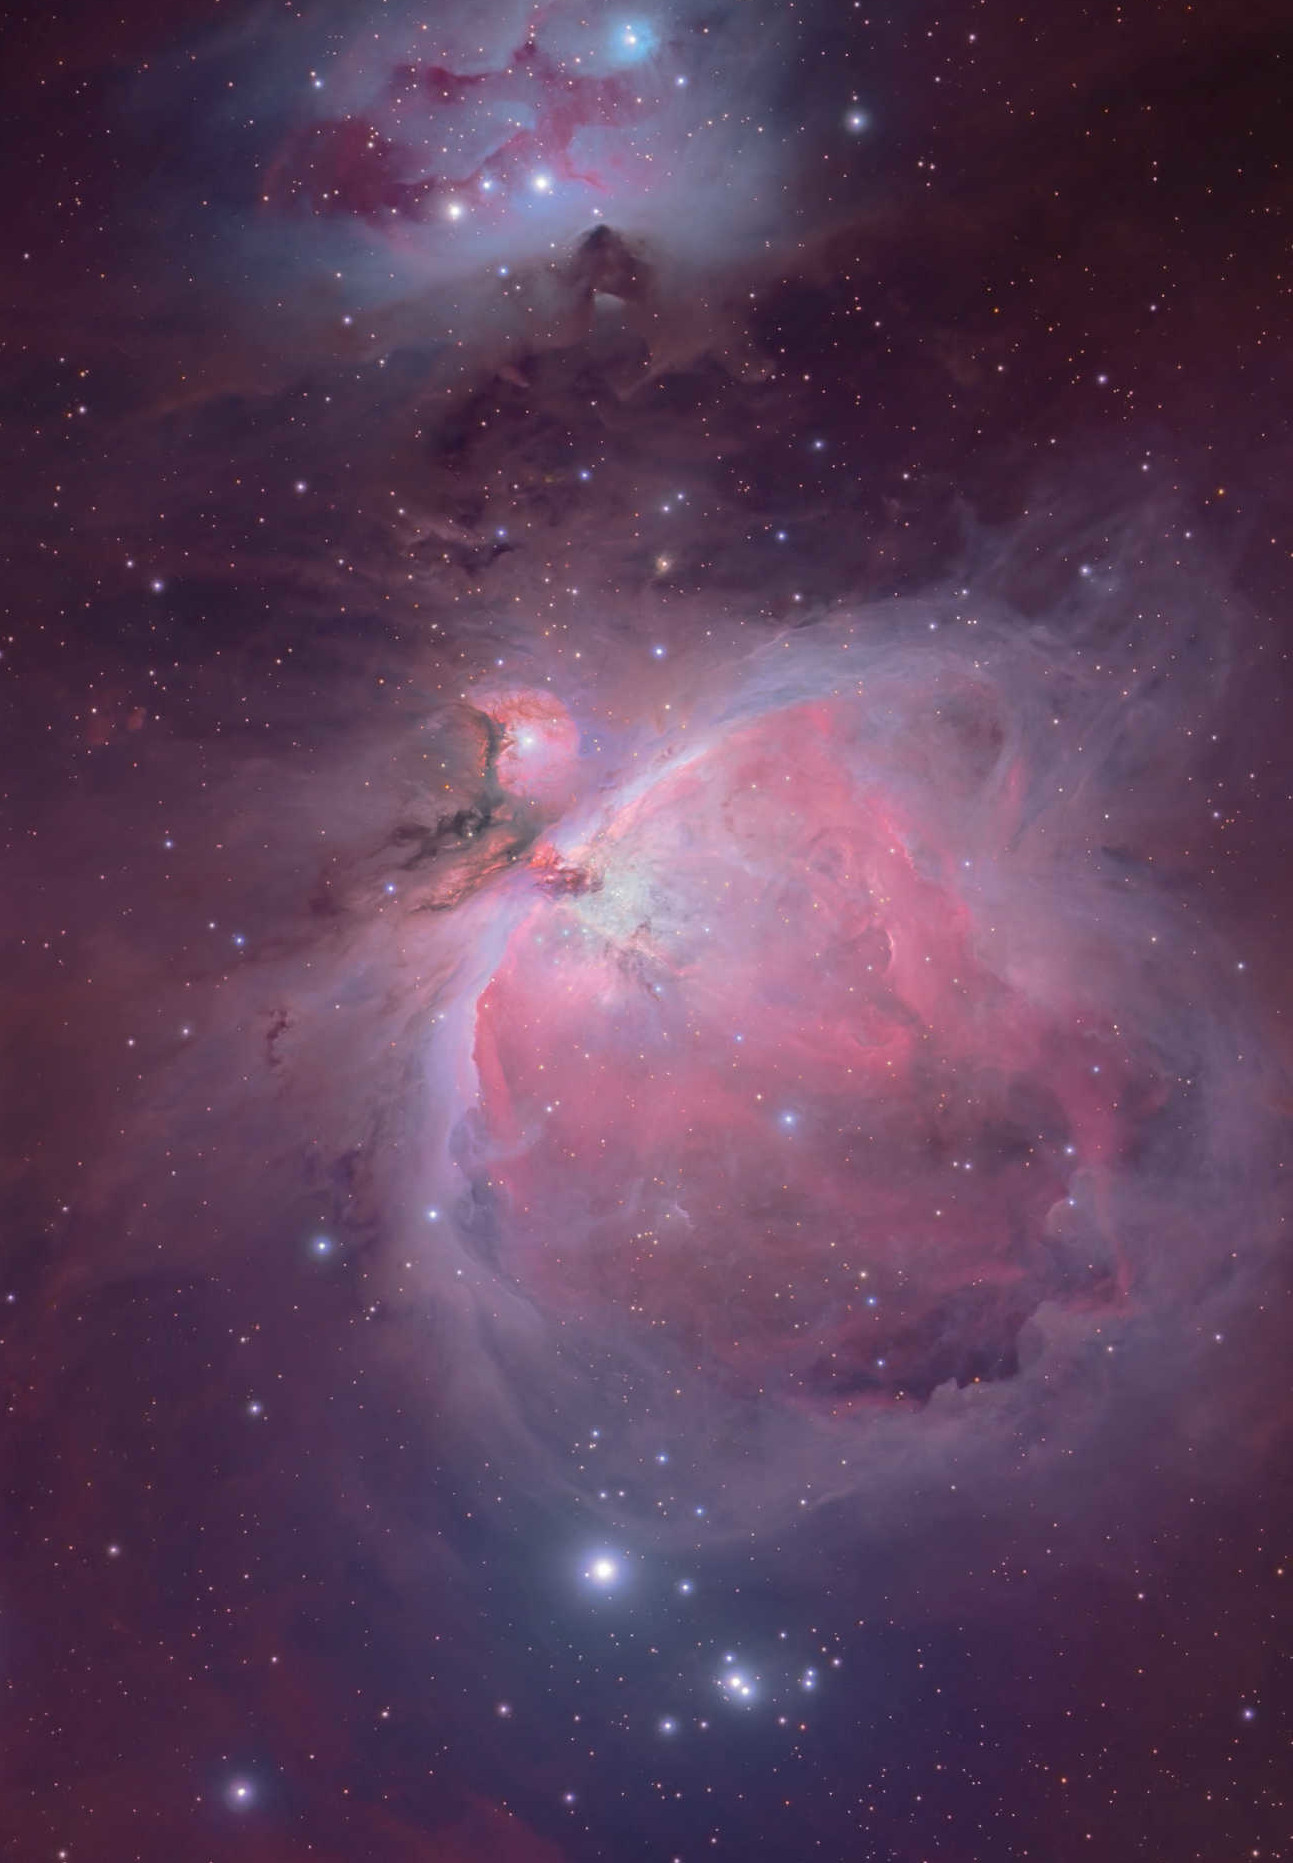 The fantastic Orion Nebula inspires many amateur astronomers. Mario Weigand